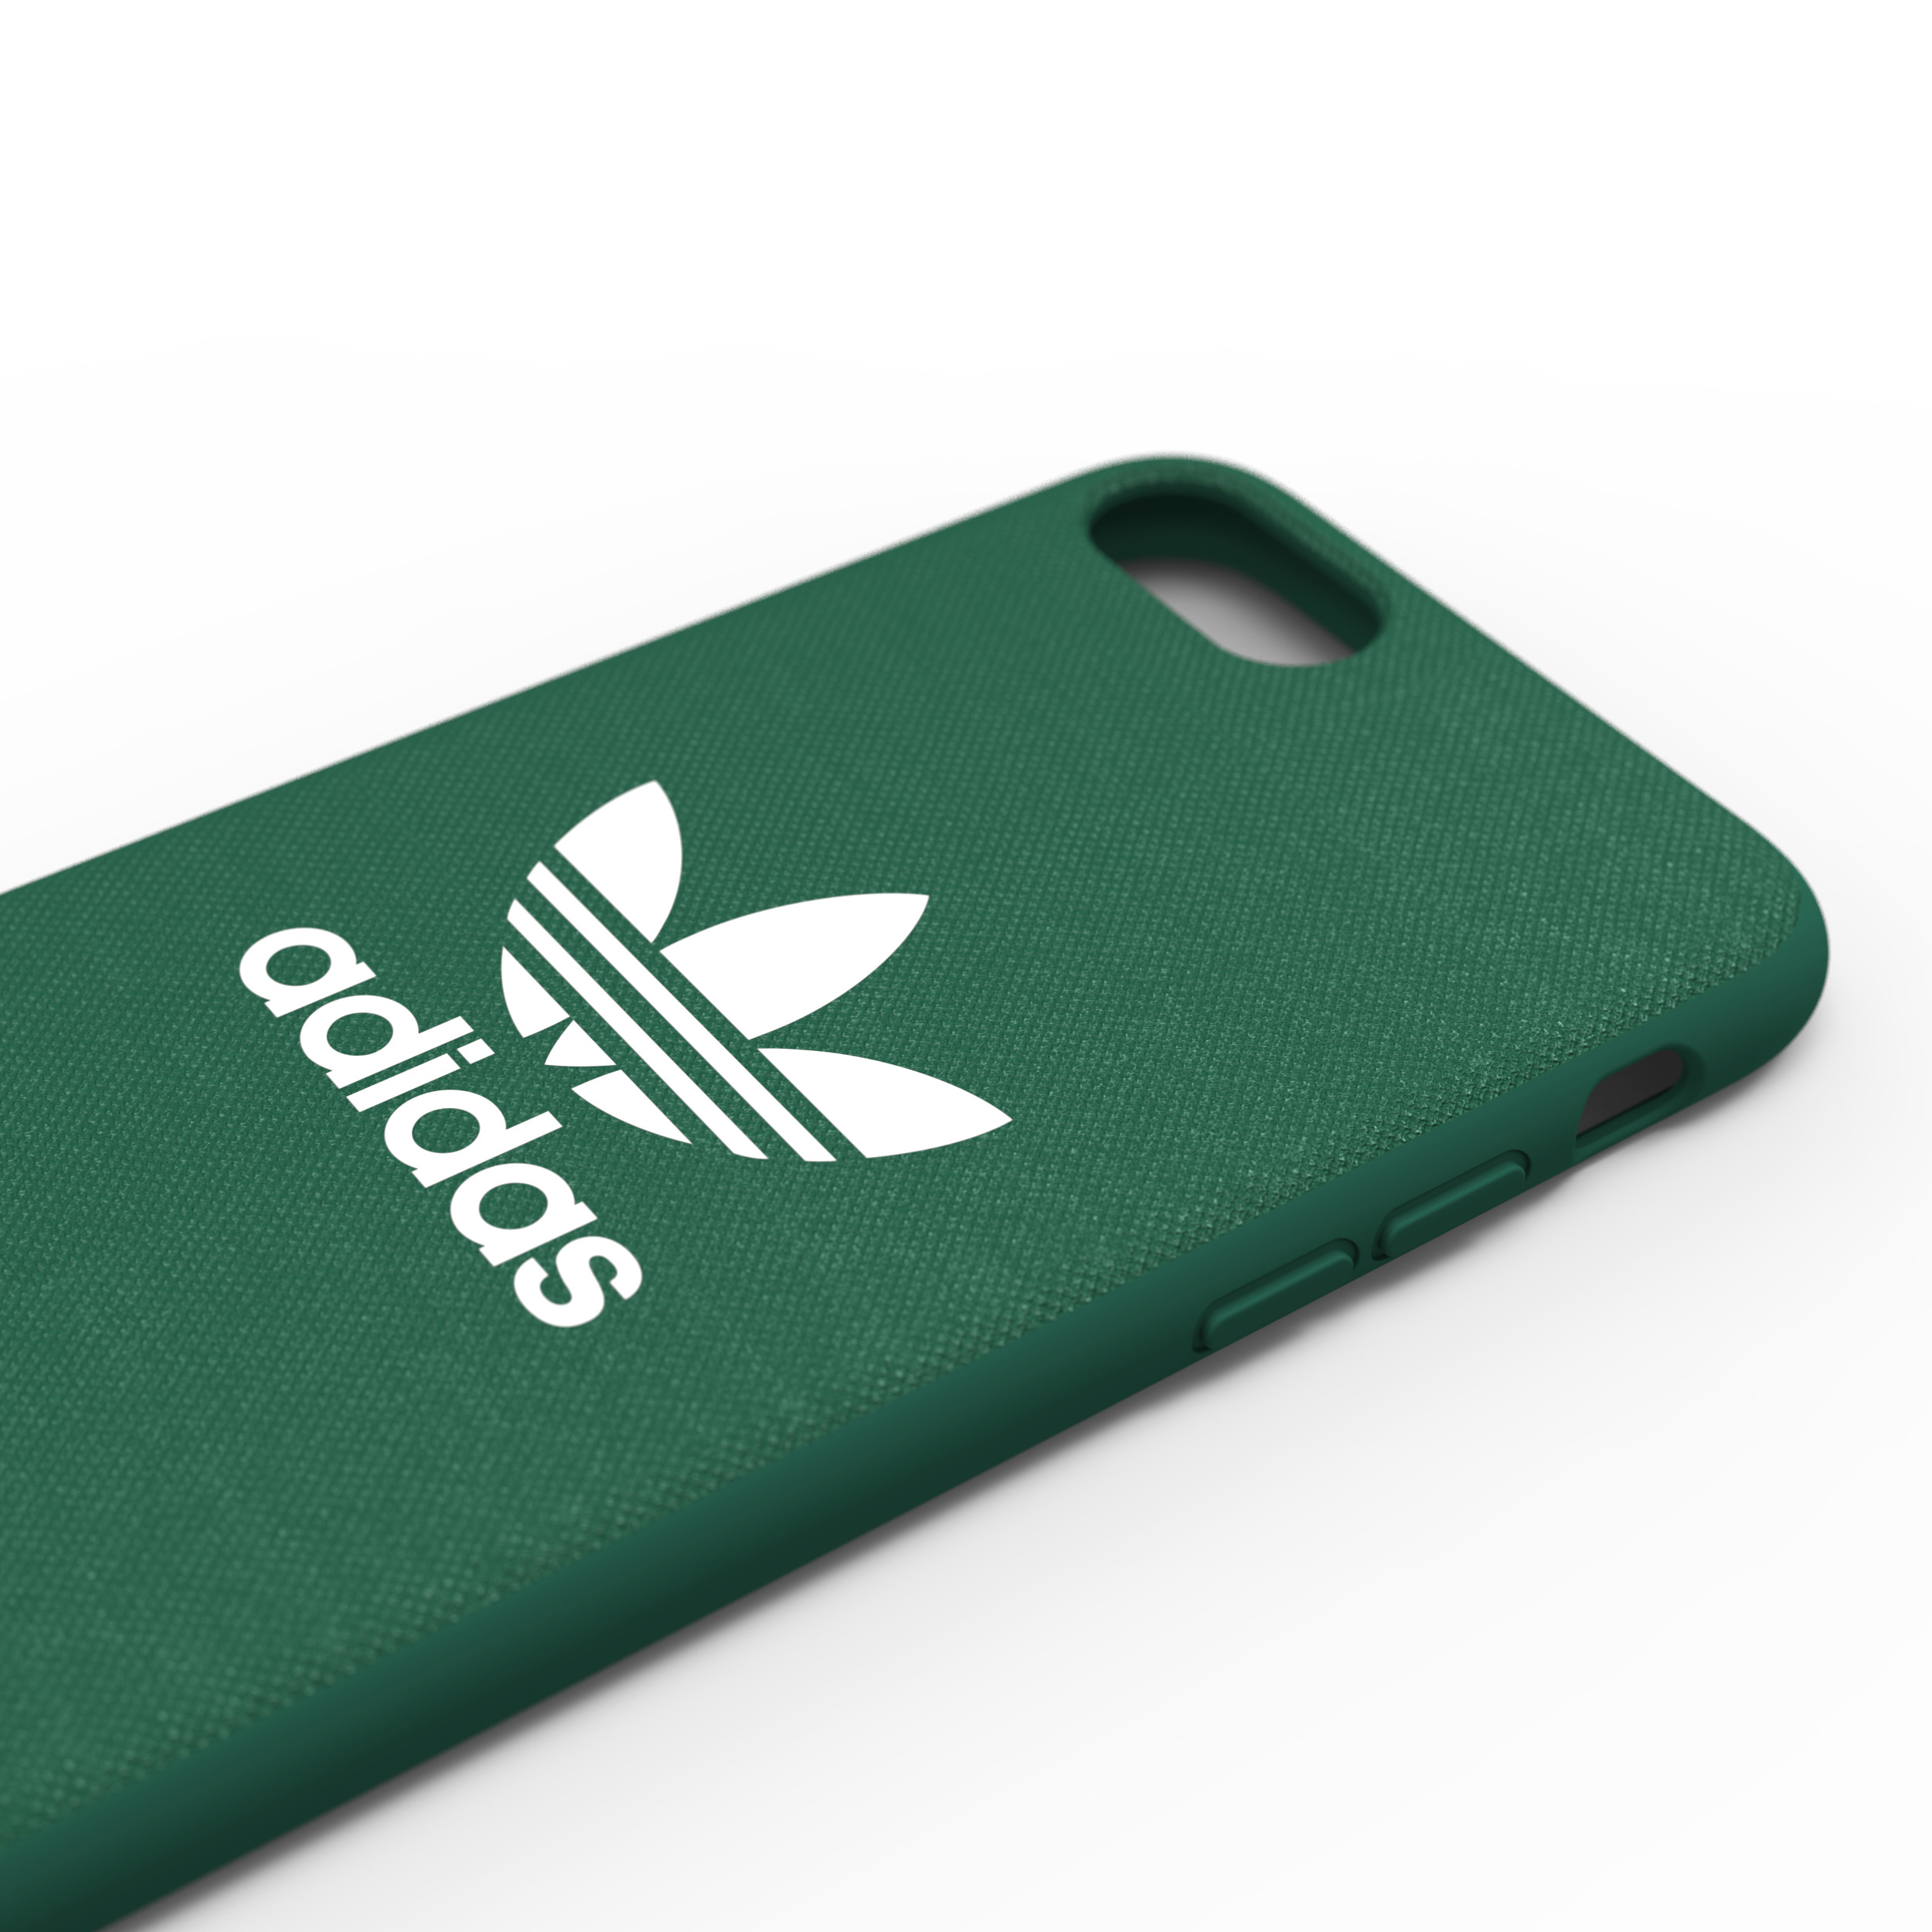 8 8, ADIDAS 29934 Grün 7, iPhone IP iPhone Backcover, Apple, CASE 7 MOULDED GREEN, 6 6, ORIGINALS OR iPhone